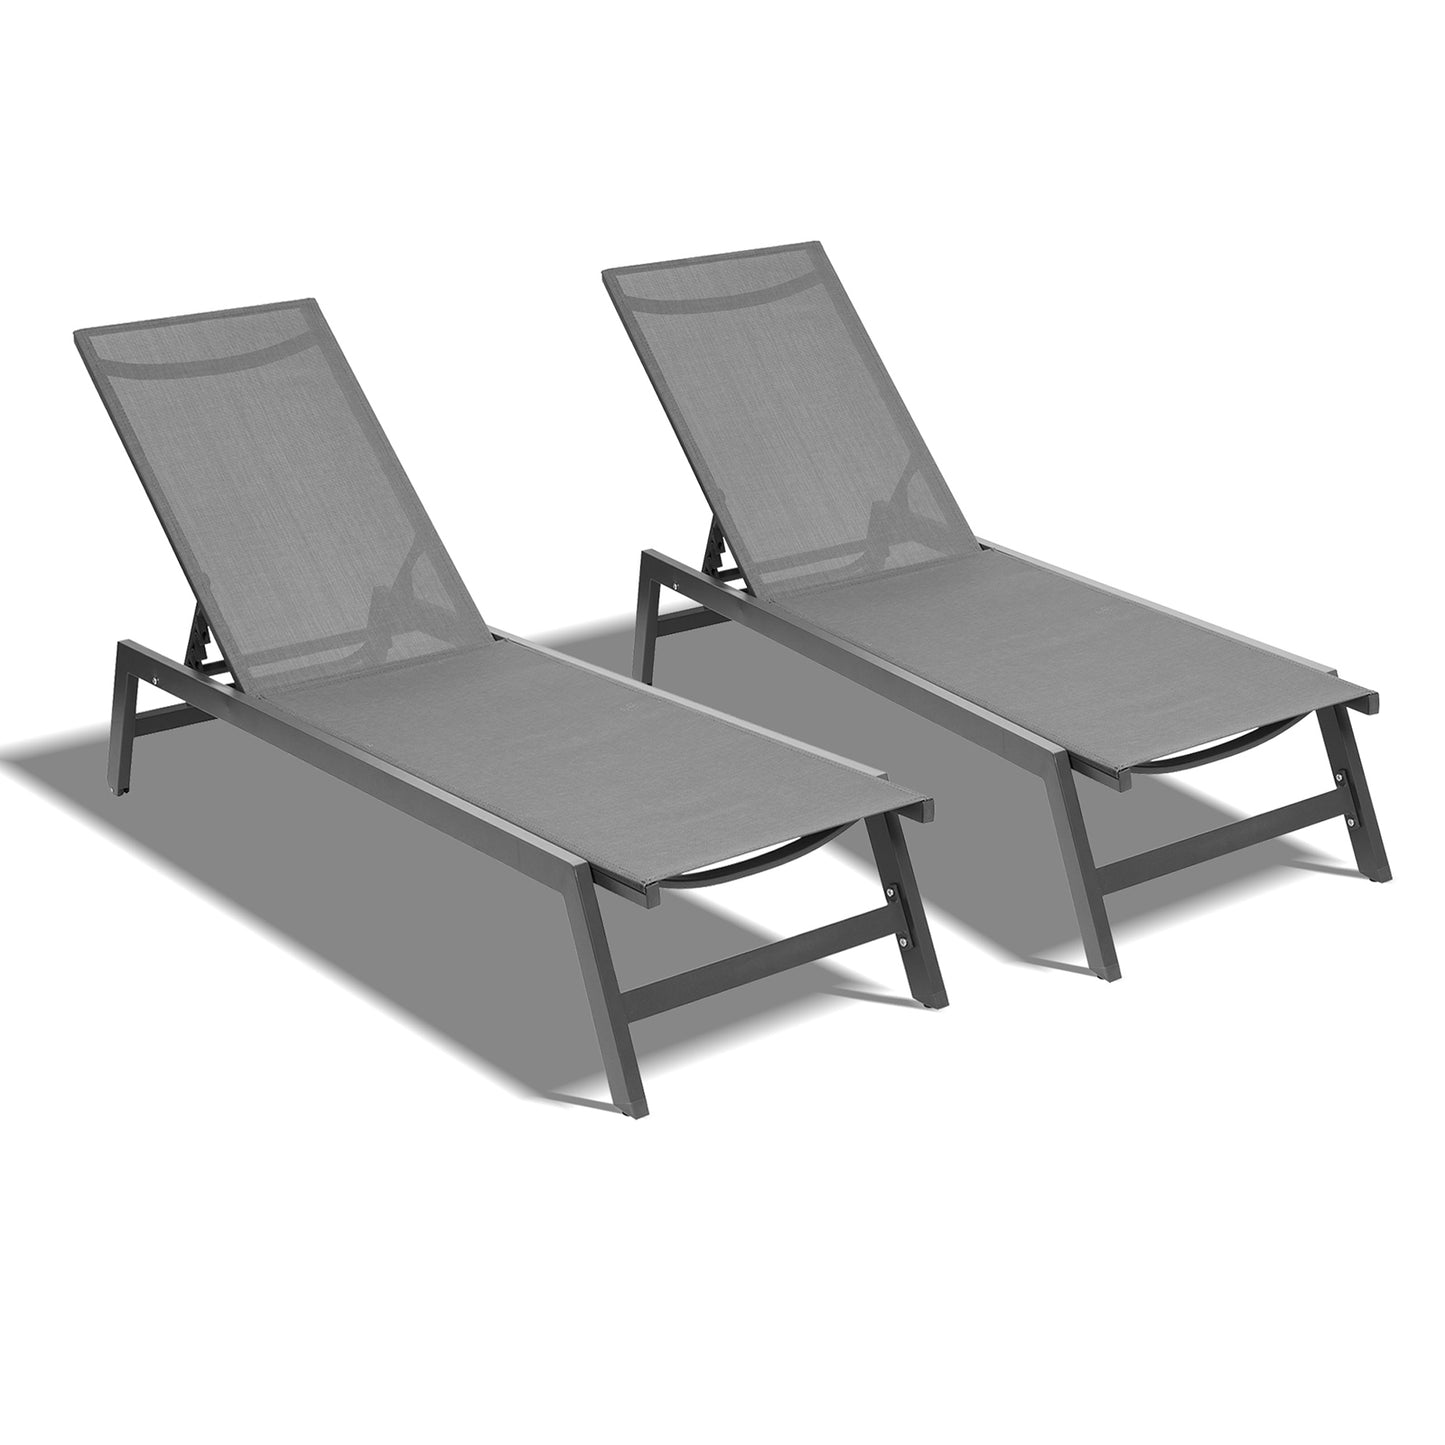 Outdoor 2-Pcs Set Chaise Lounge Chairs,